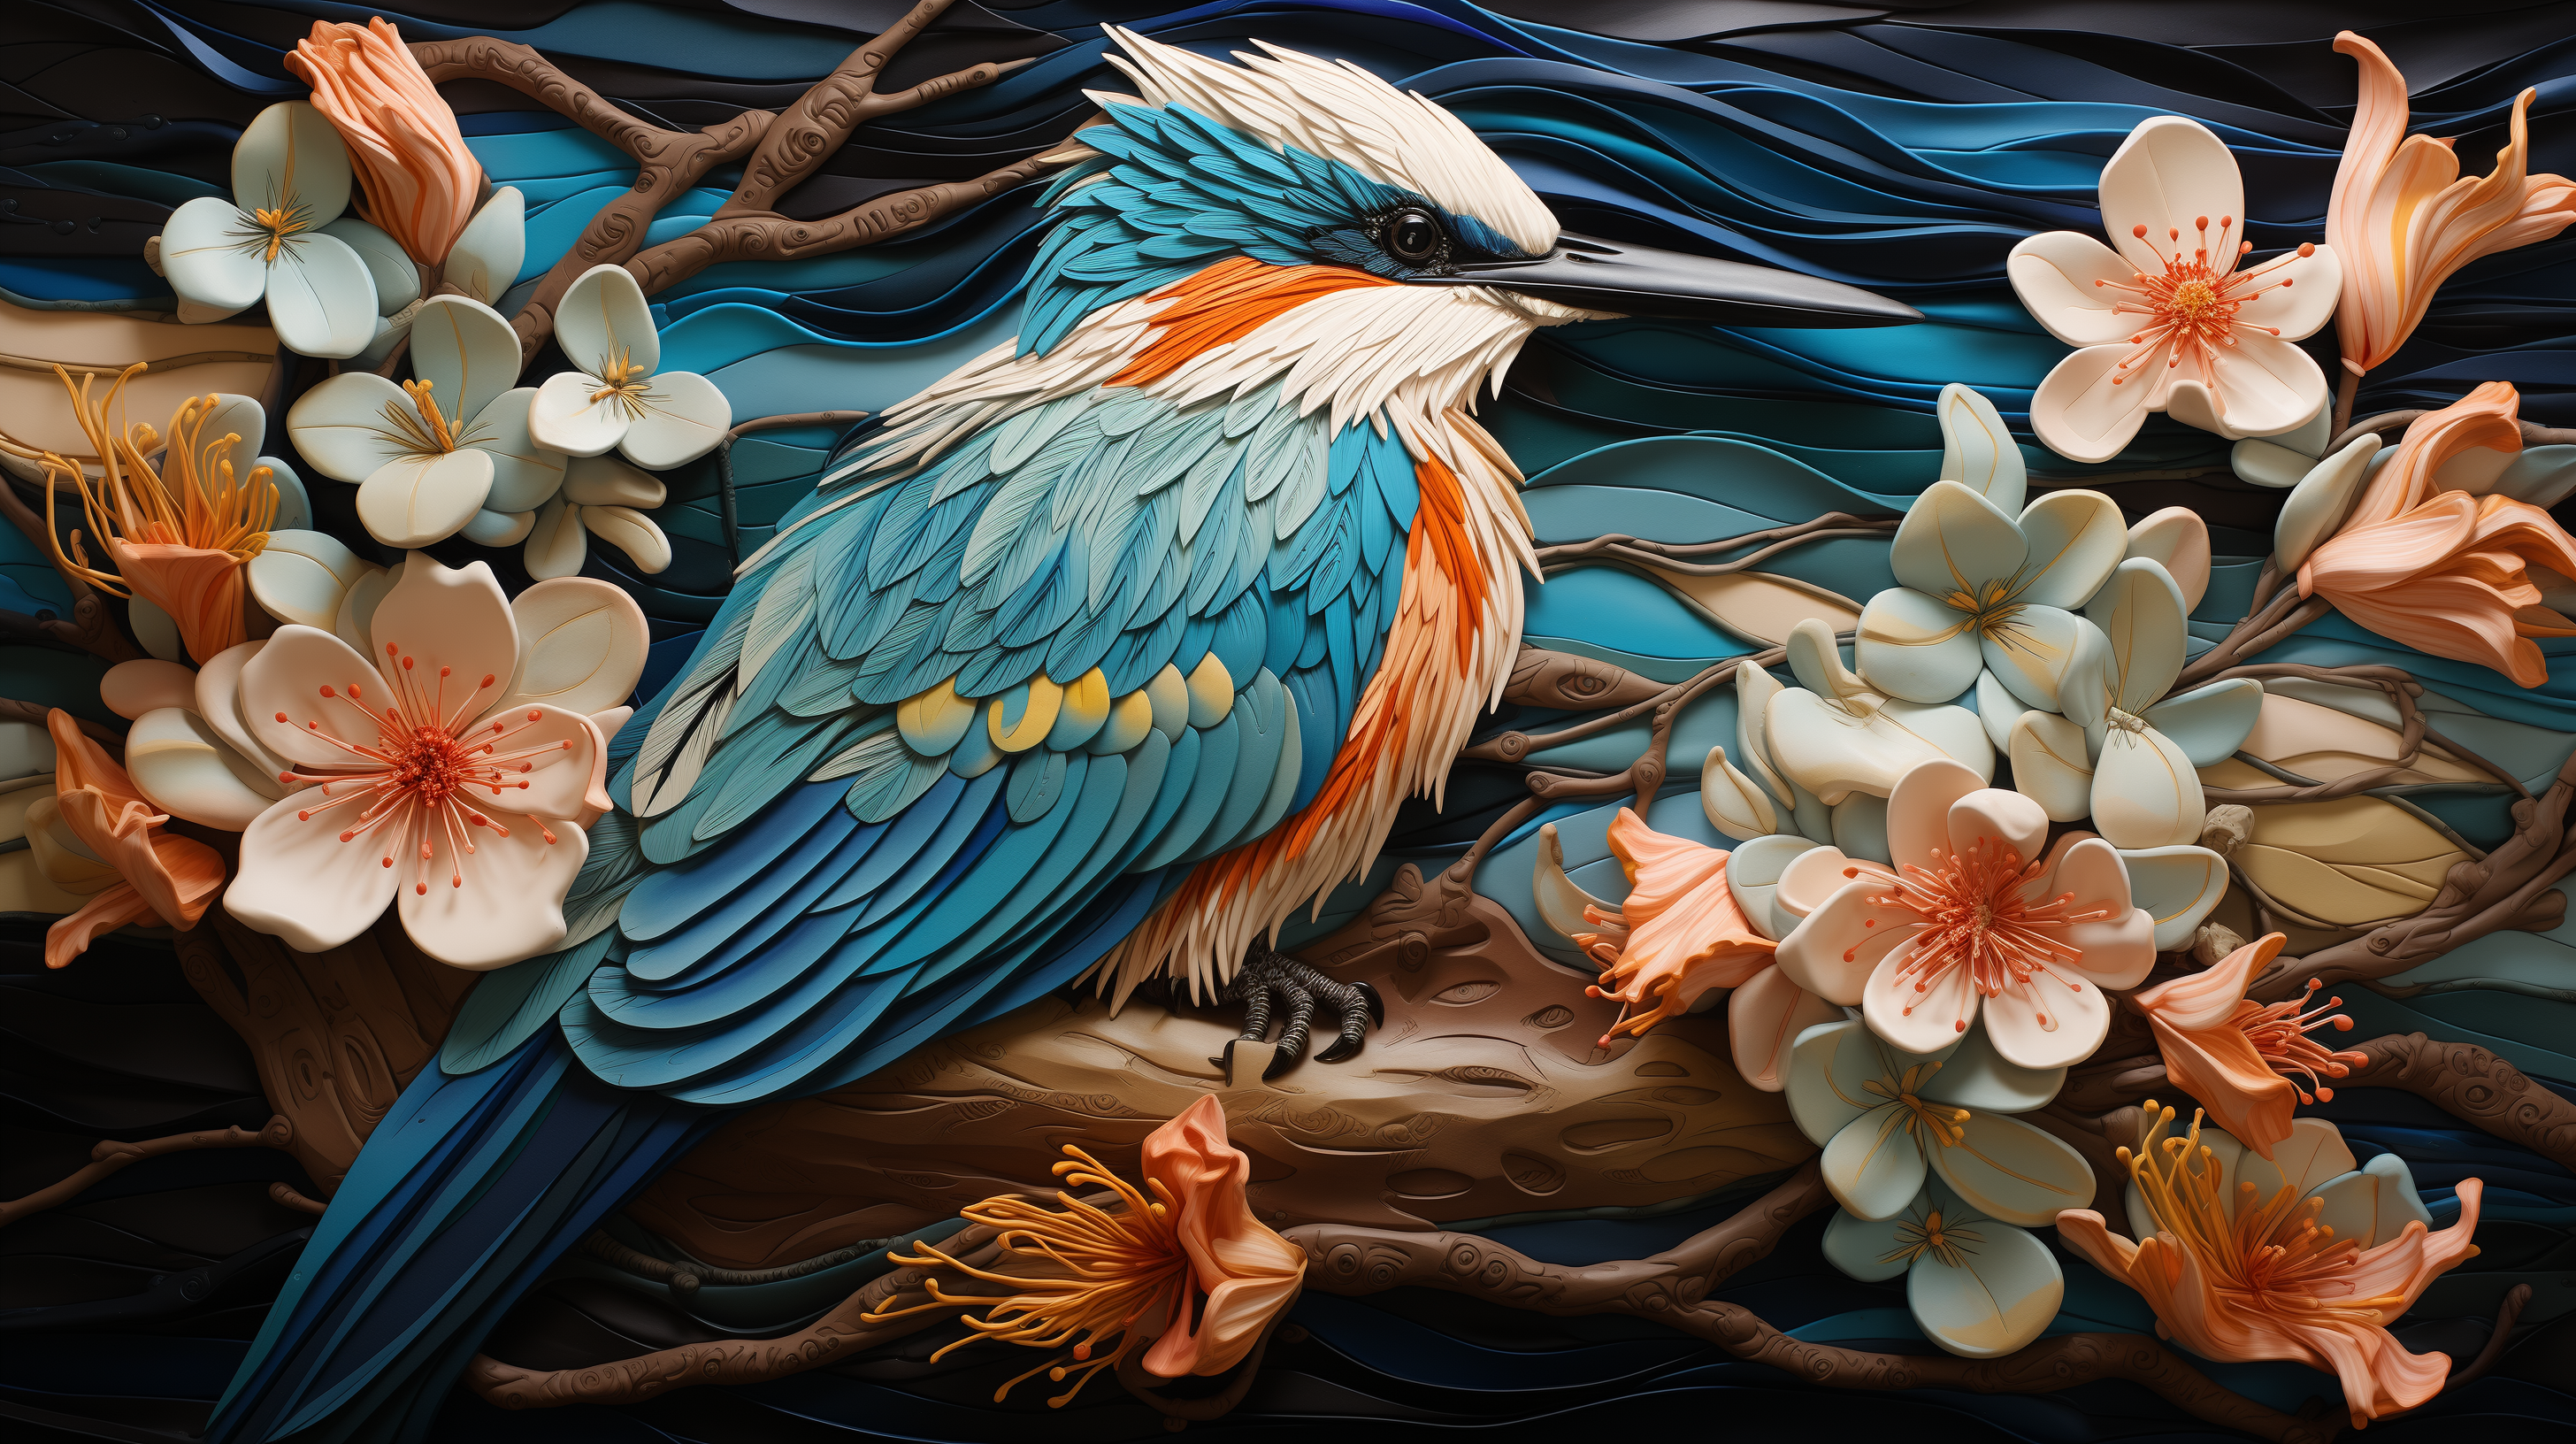 HD Desktop Wallpaper of a Colorful Kingfisher Surrounded by Blossoms.